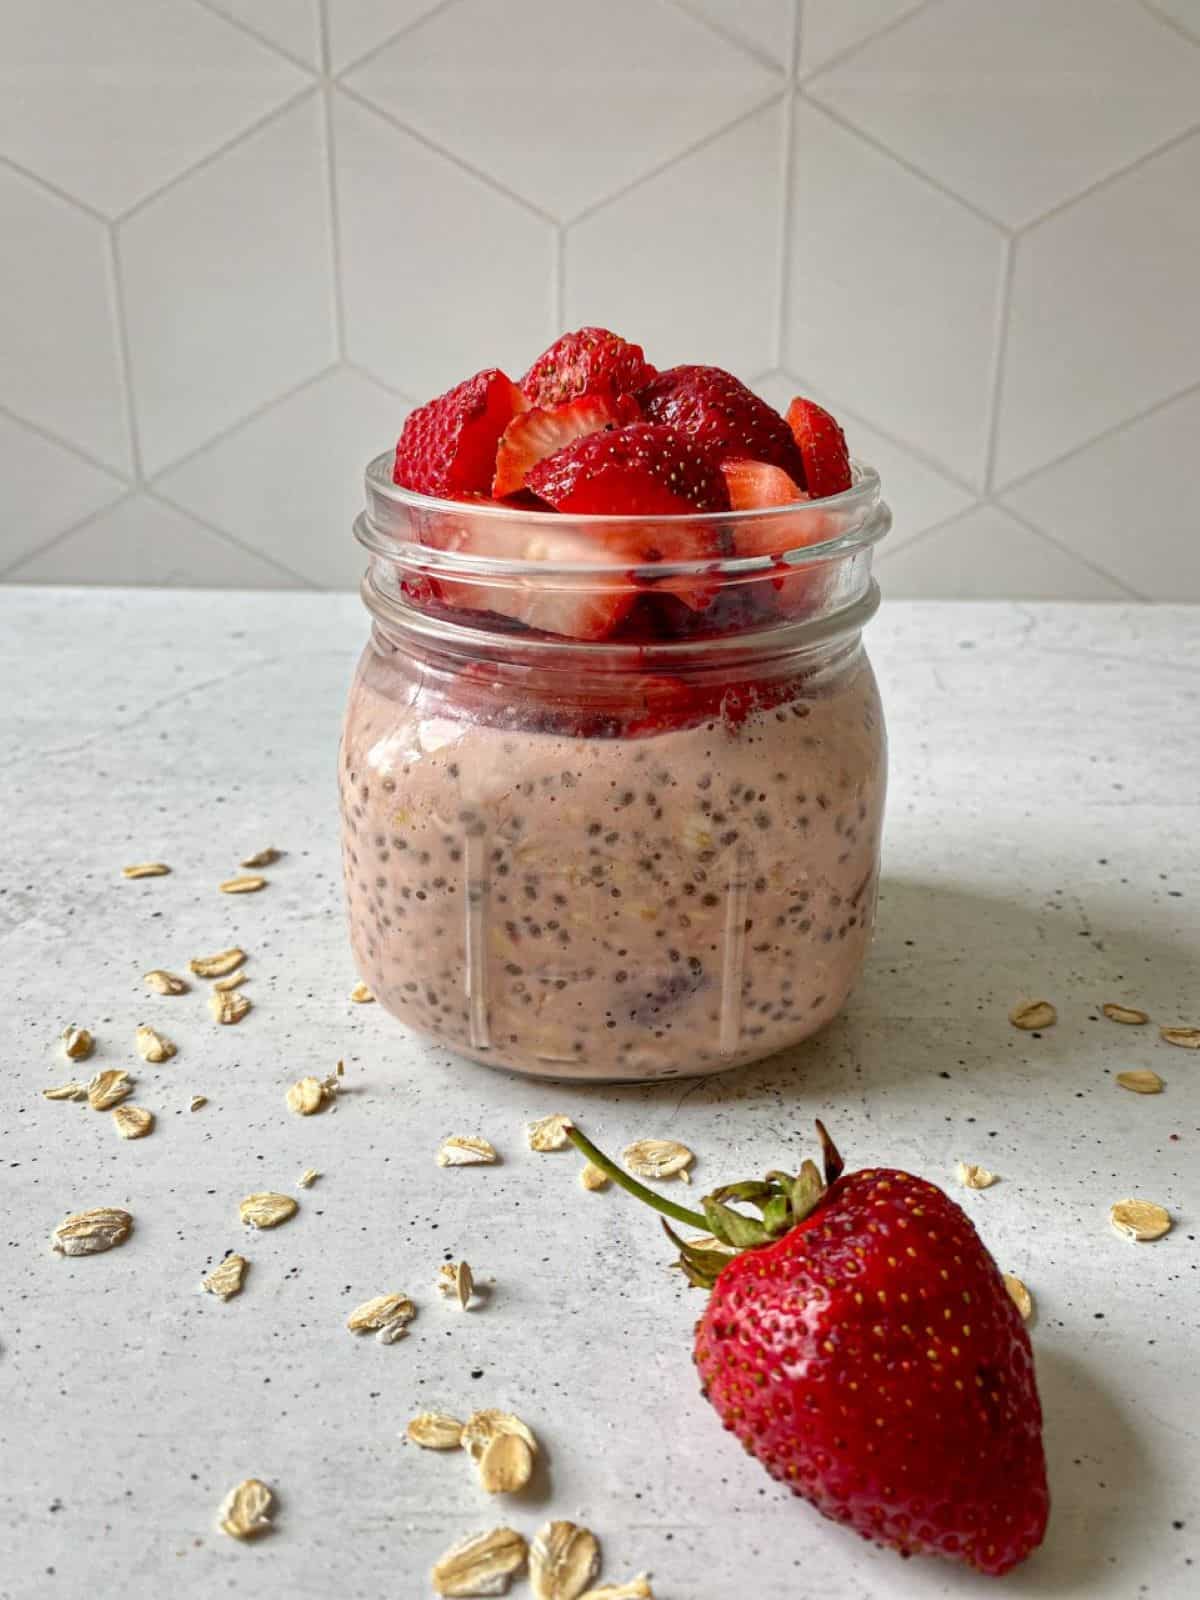 Strawberry Shortcake Overnight Oats in a mason jar topped with chopped fresh strawberries. A large strawberry and oats are scattered around the jar.